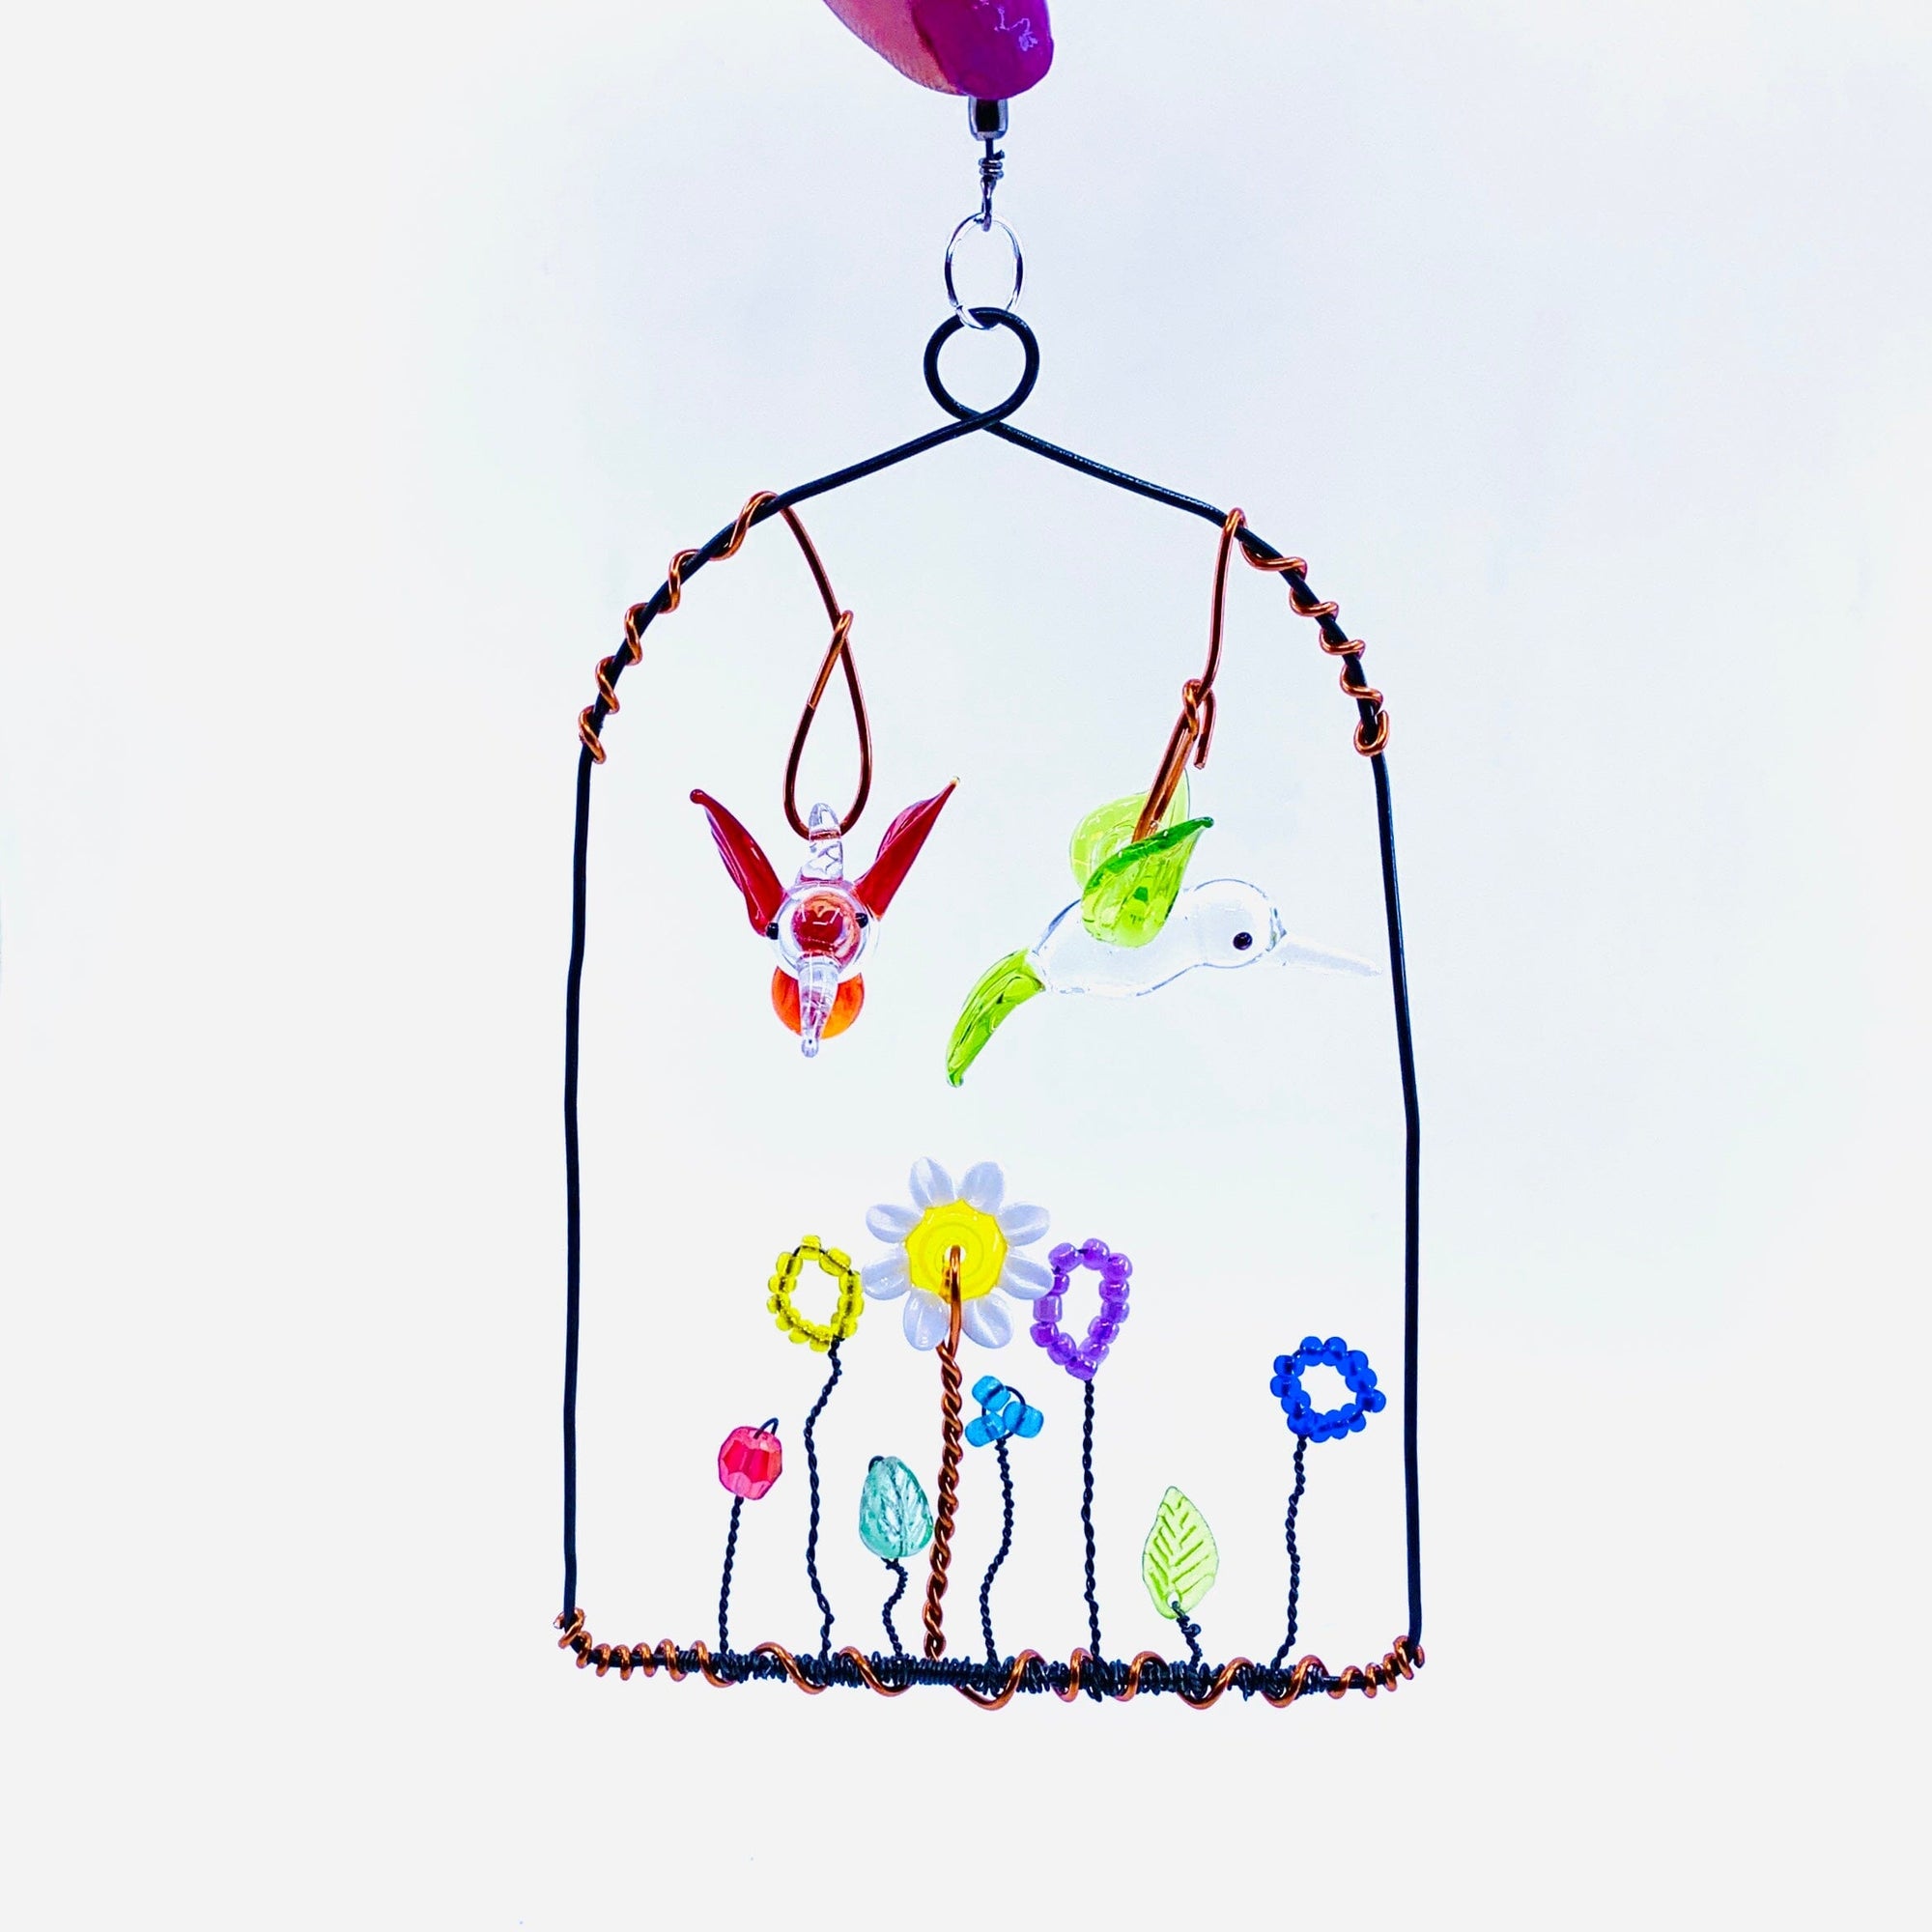 Glass Humming Birds in Wired Flower Garden, 1 Decor Whimsical Wire and Glass 